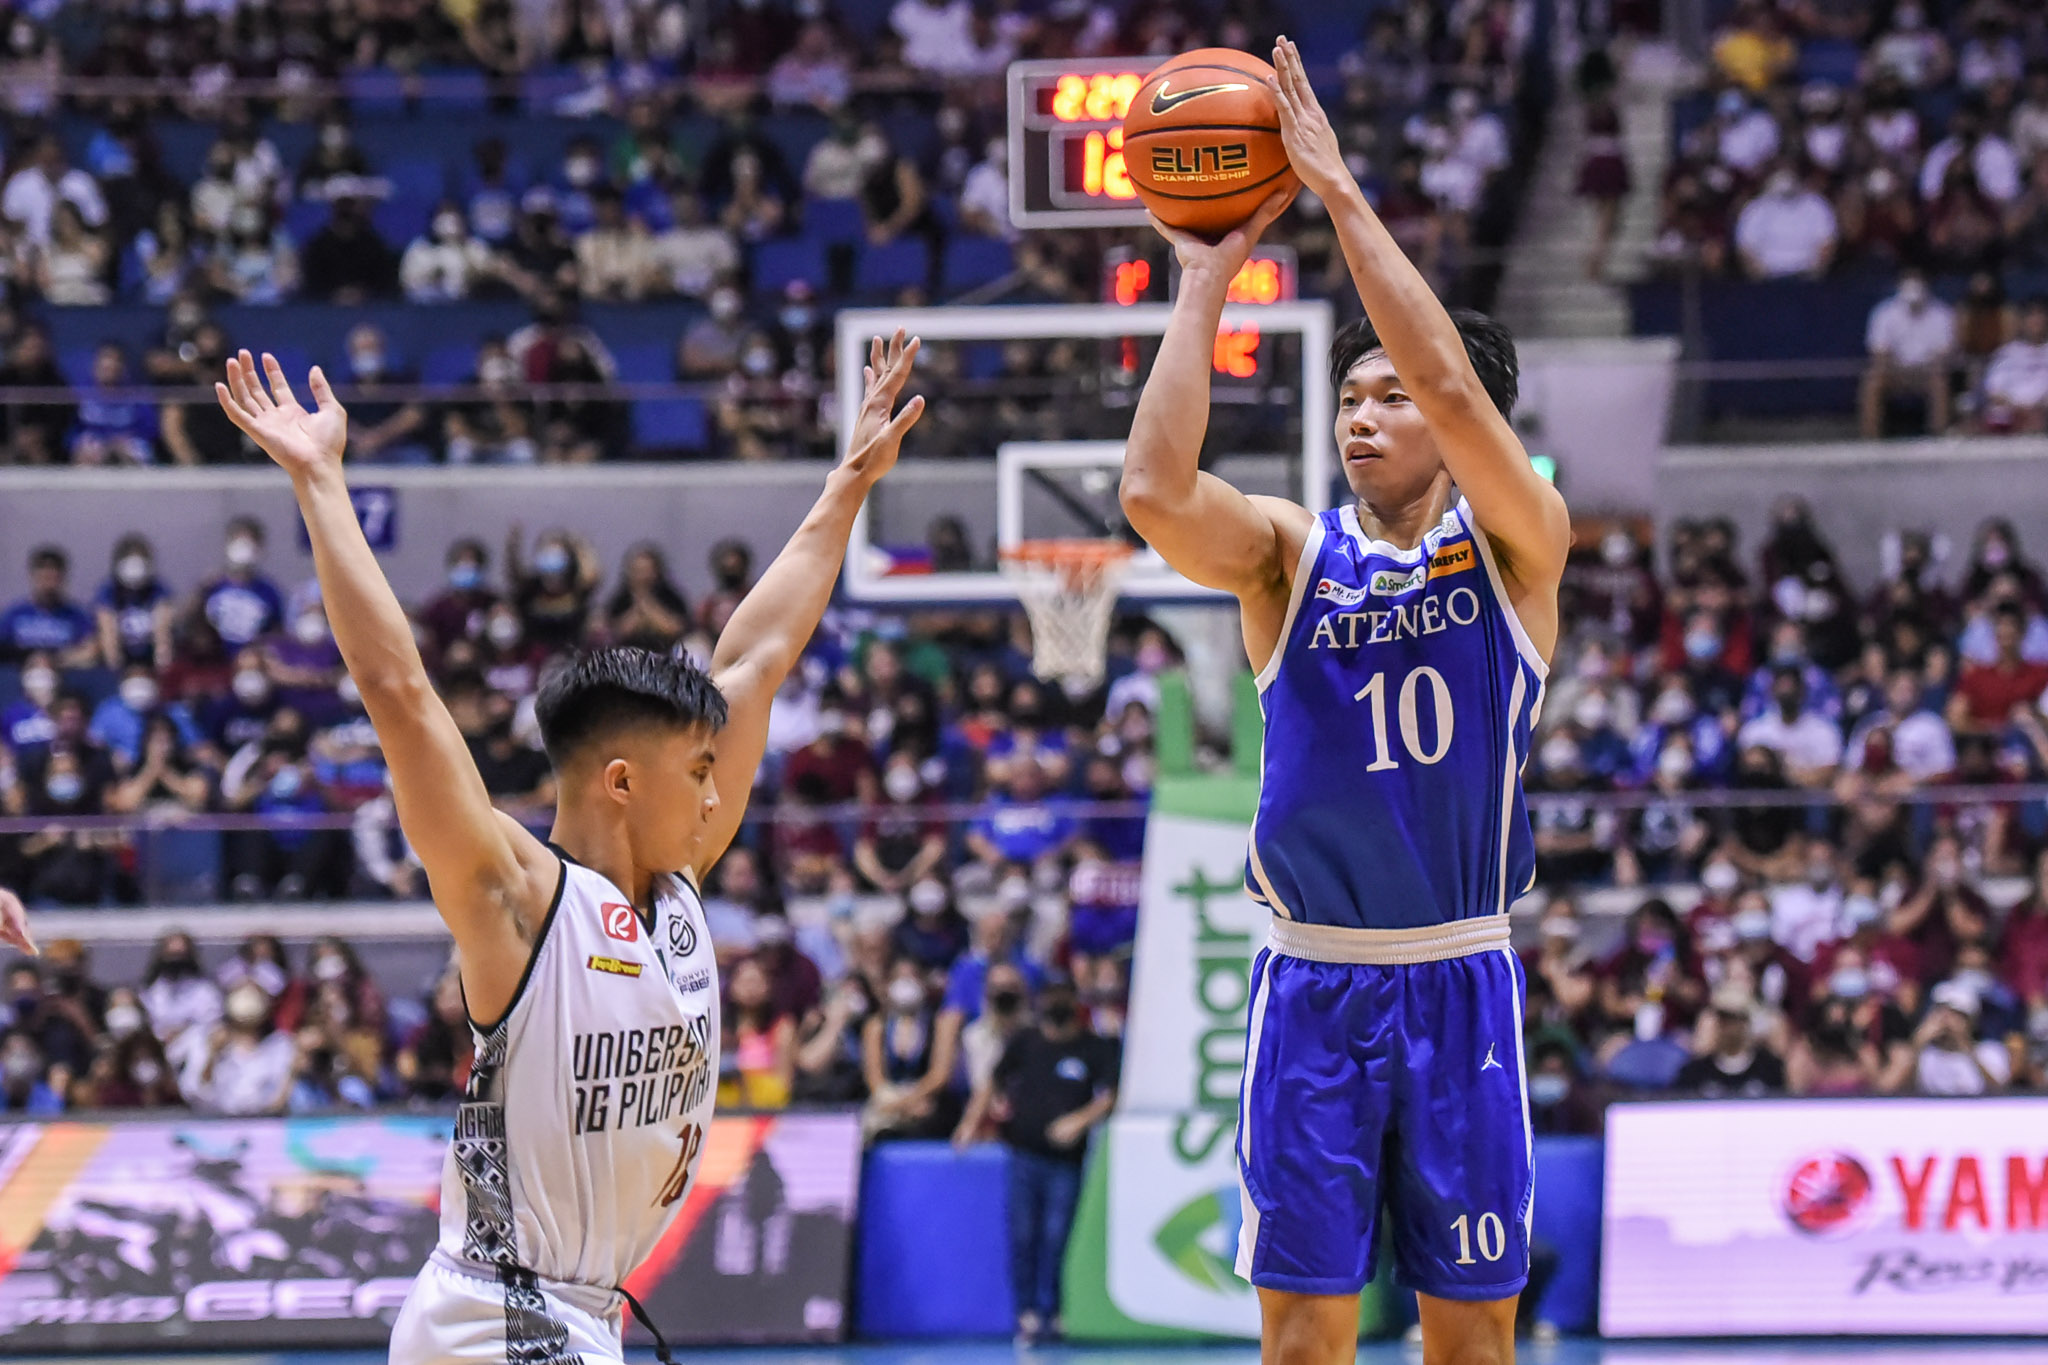 UAAP 85 MBB DI, Kouame show way vs UP as Ateneo clinches twice-to-beat